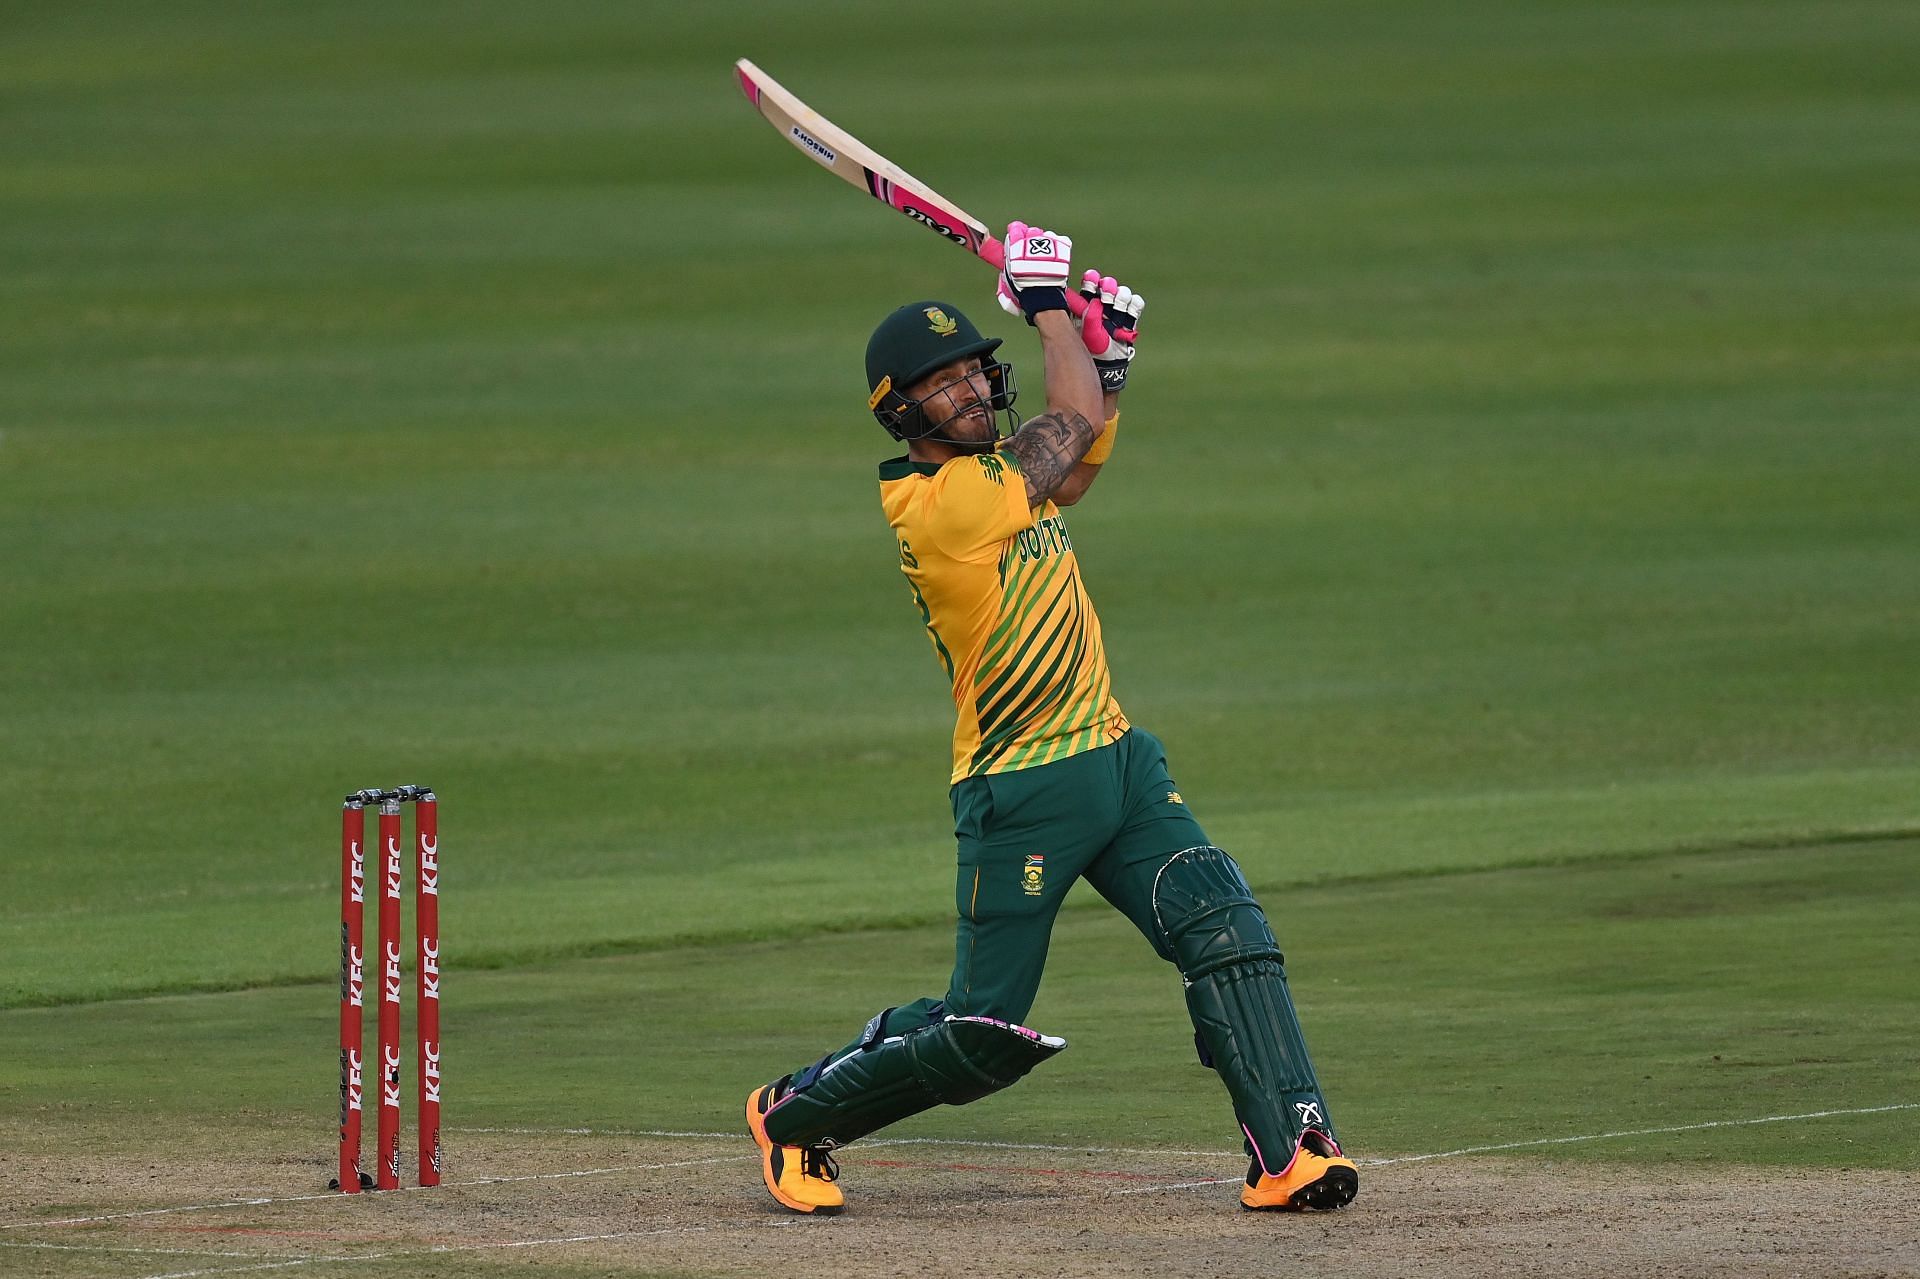 Faf du Plessis is leading Bangla Tigers in the Abu Dhabi T10 League 2021-22.